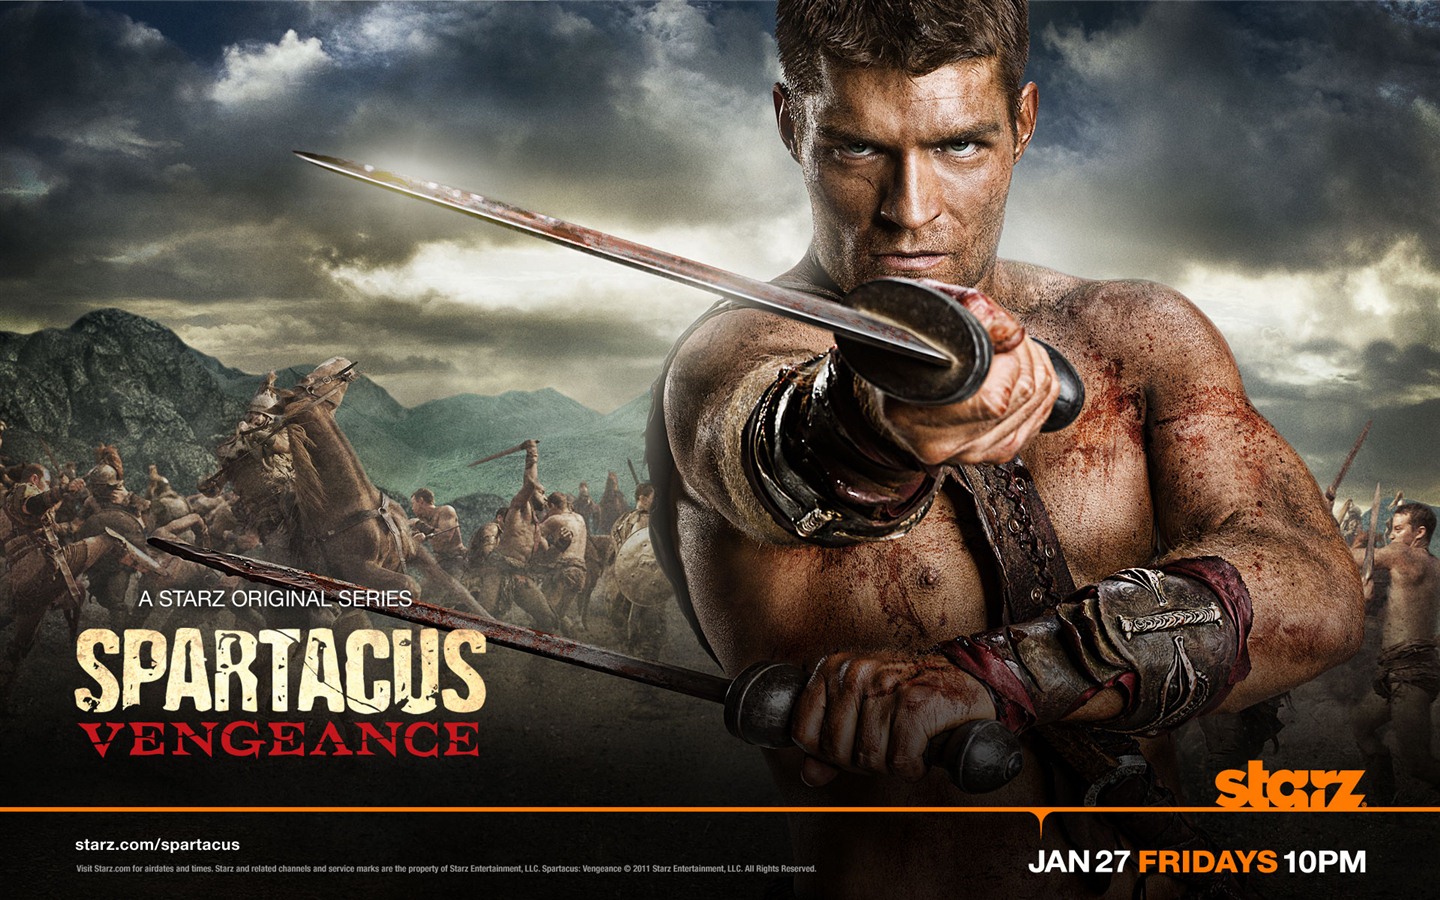 Spartacus: Vengeance HD wallpapers #1 - 1440x900